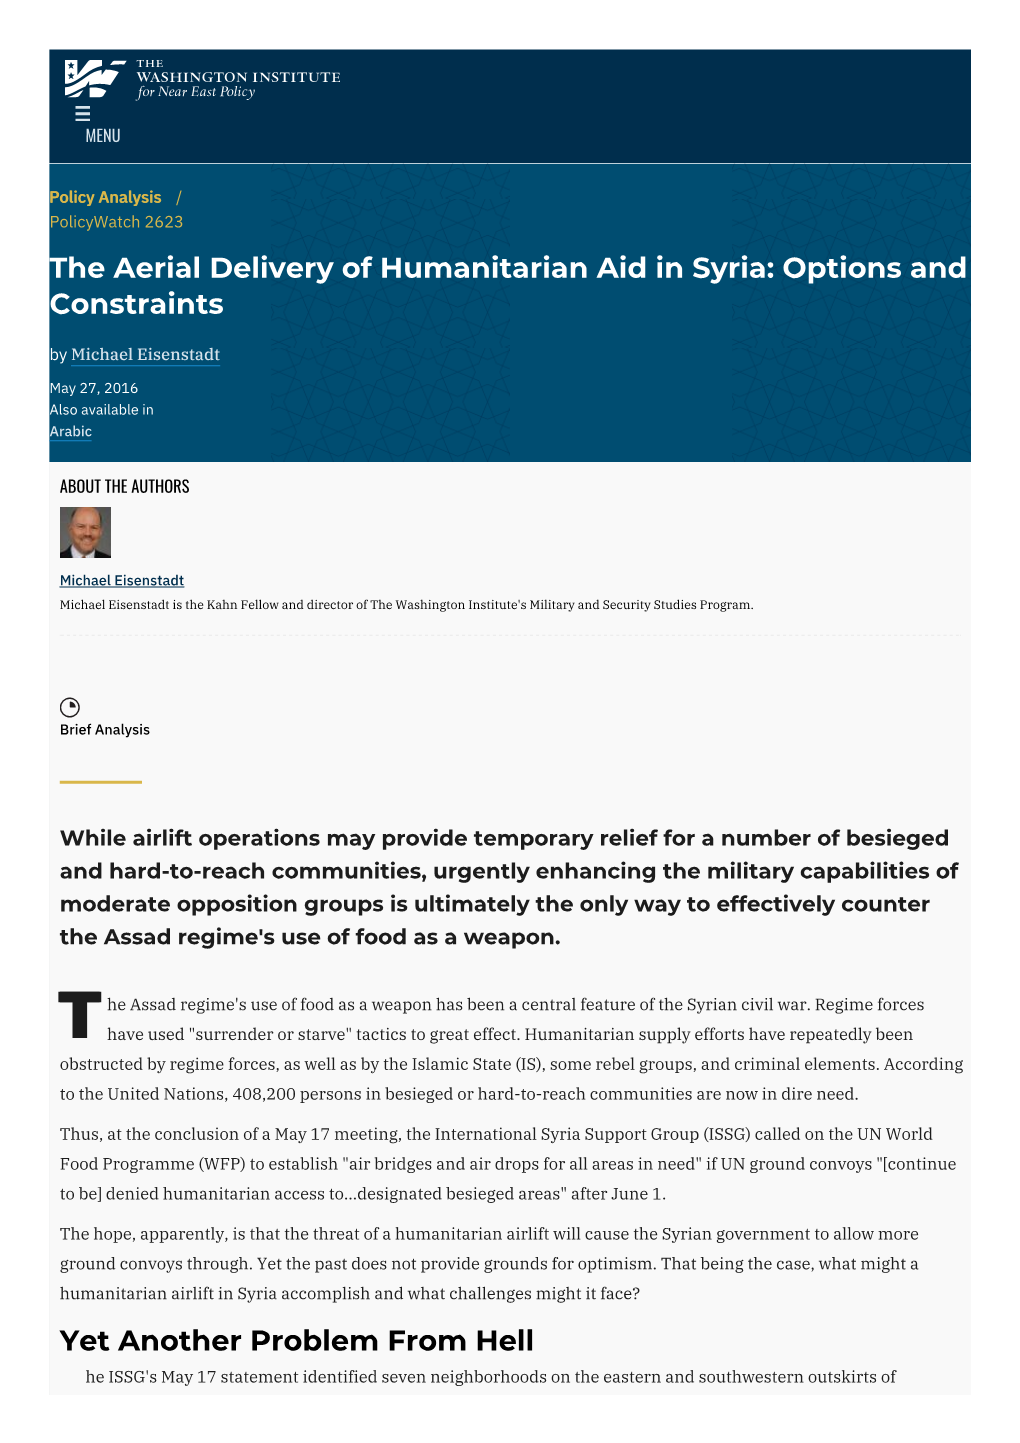 The Aerial Delivery of Humanitarian Aid in Syria: Options and Constraints by Michael Eisenstadt